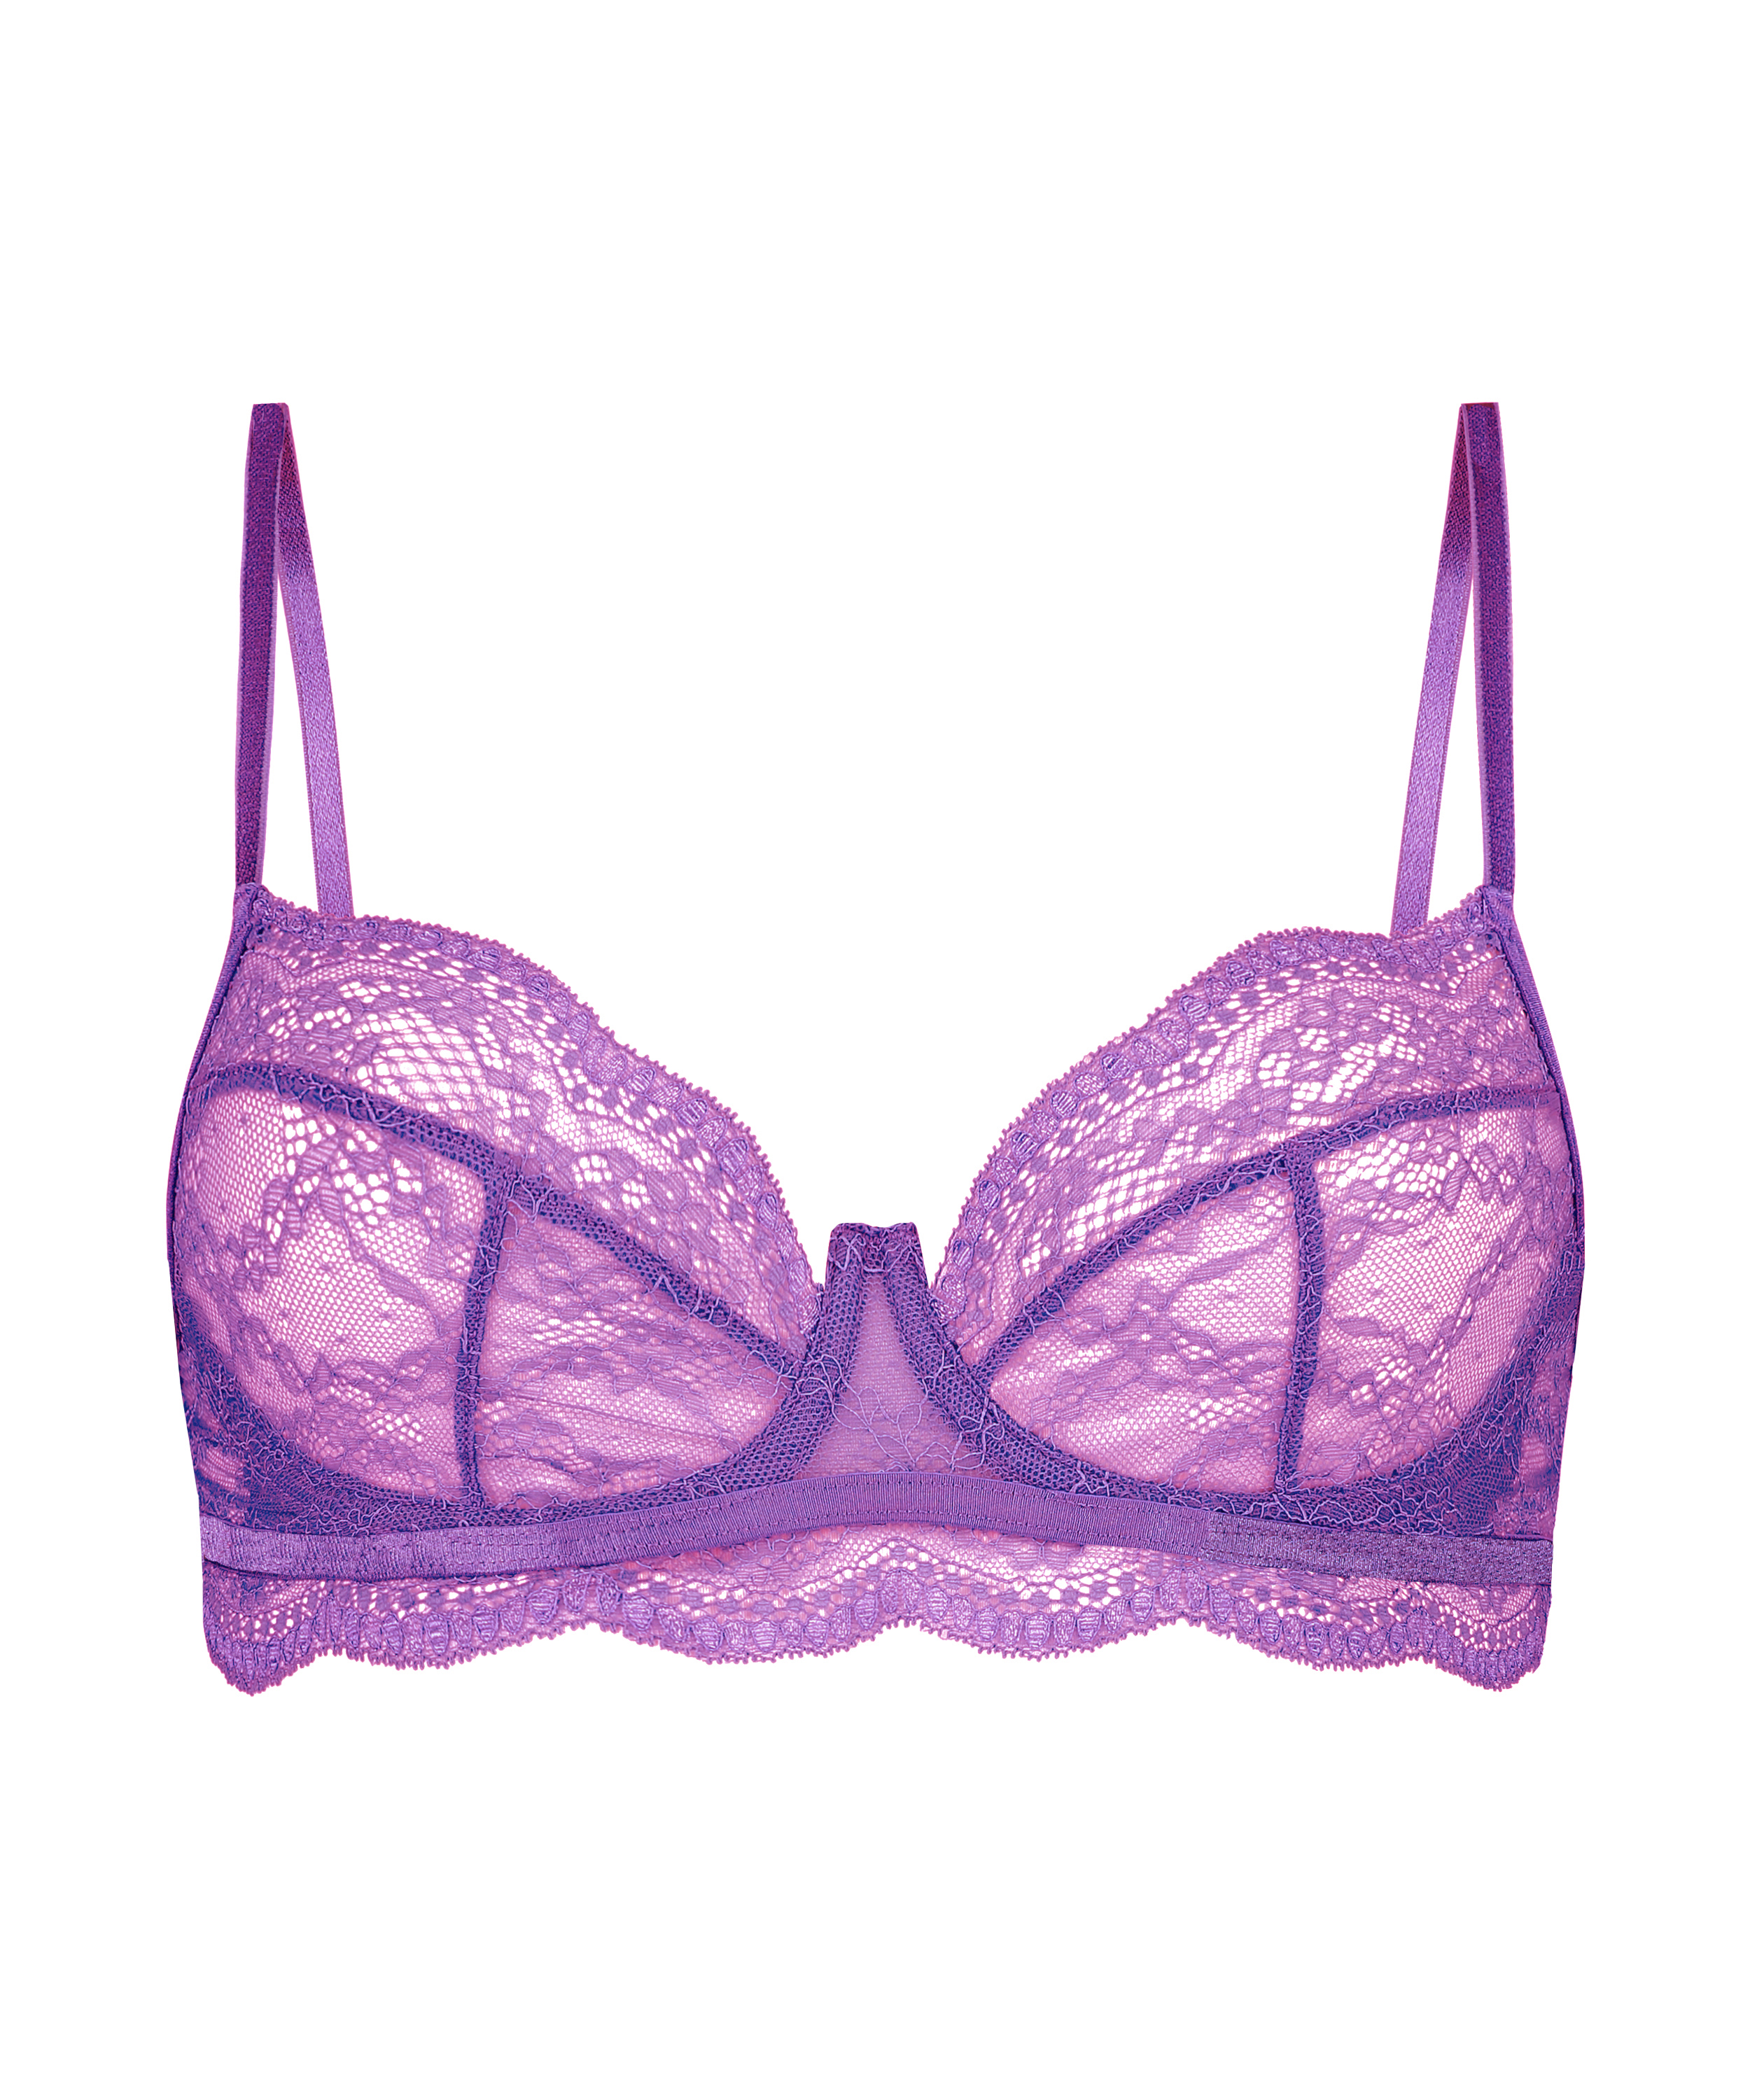 Isabelle non-padded underwired bra for €31.99 - Delicious Demi - Hunkemöller